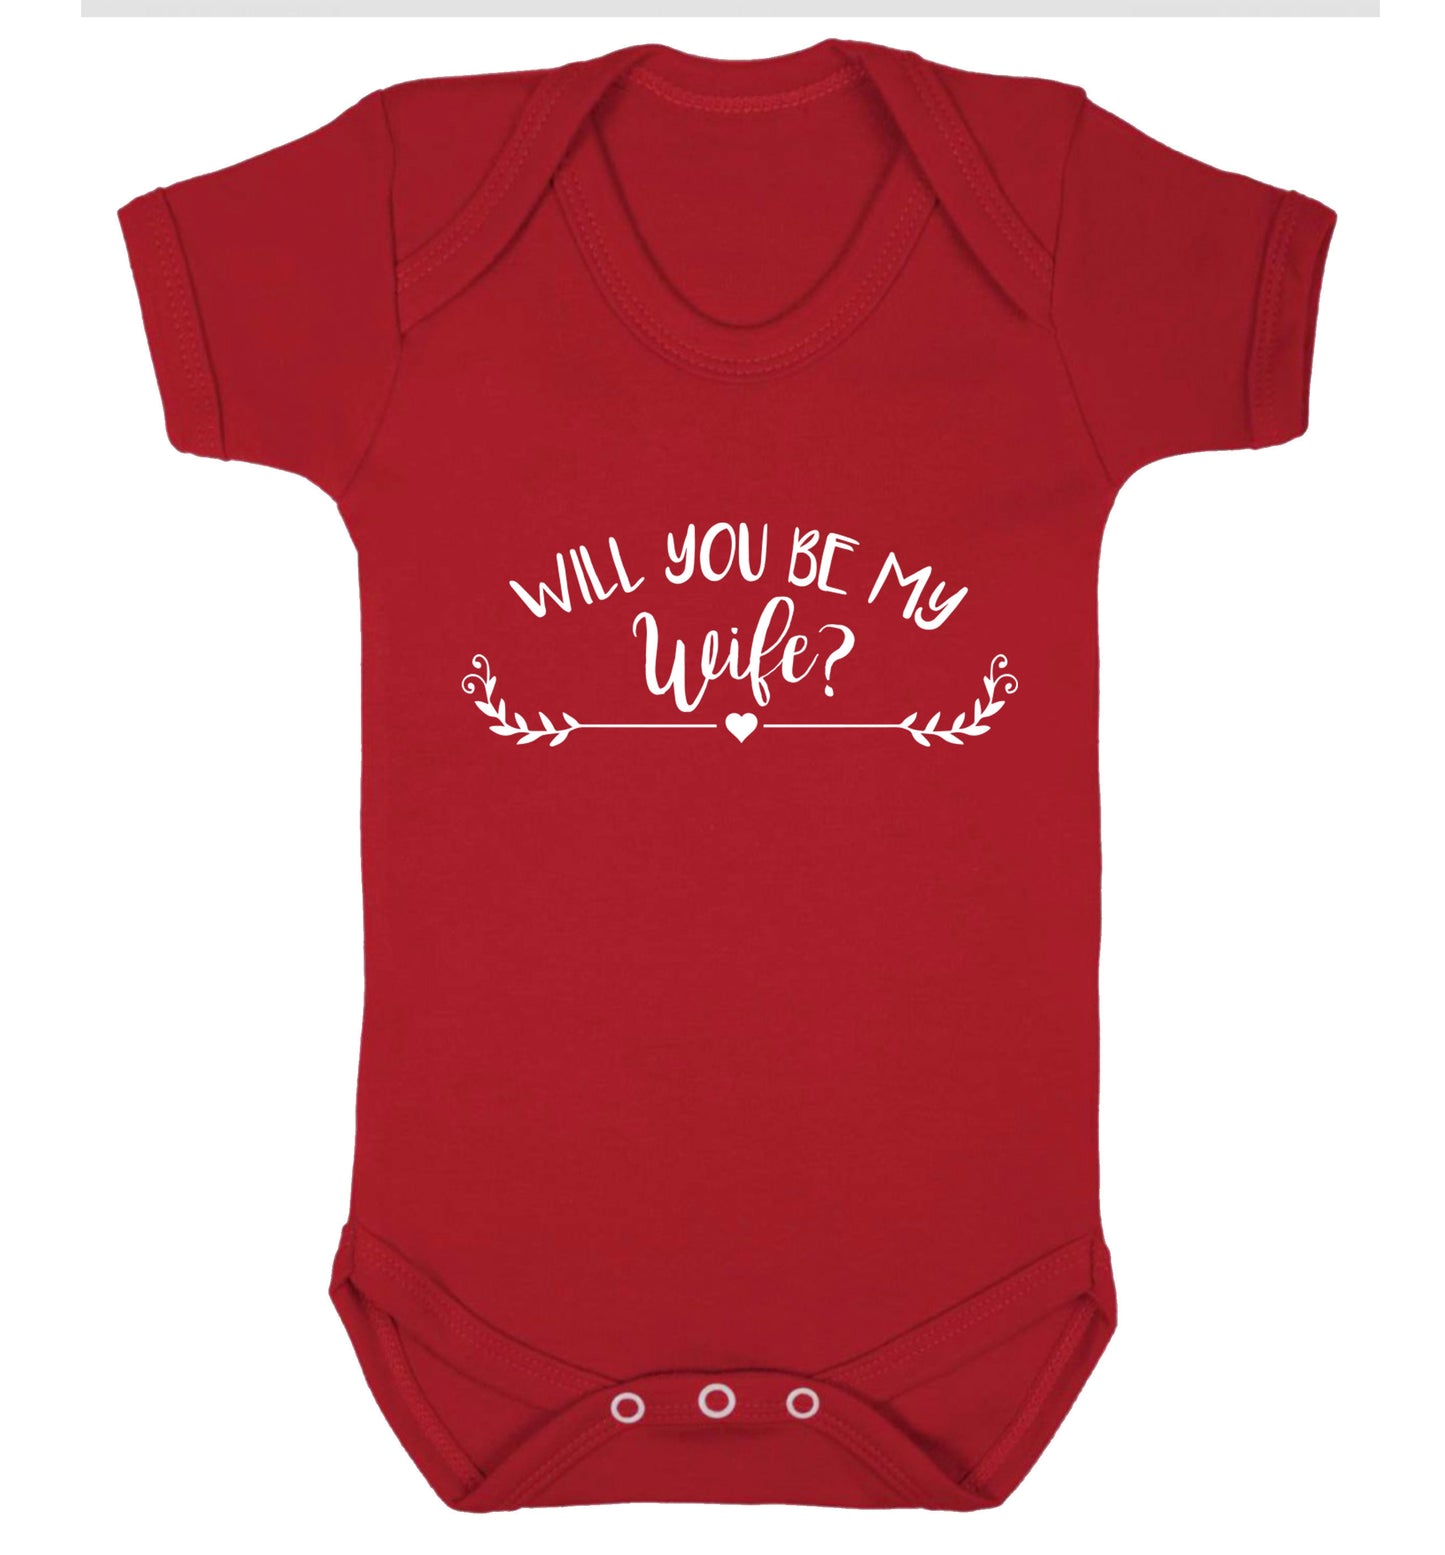 Will you be my wife? Baby Vest red 18-24 months